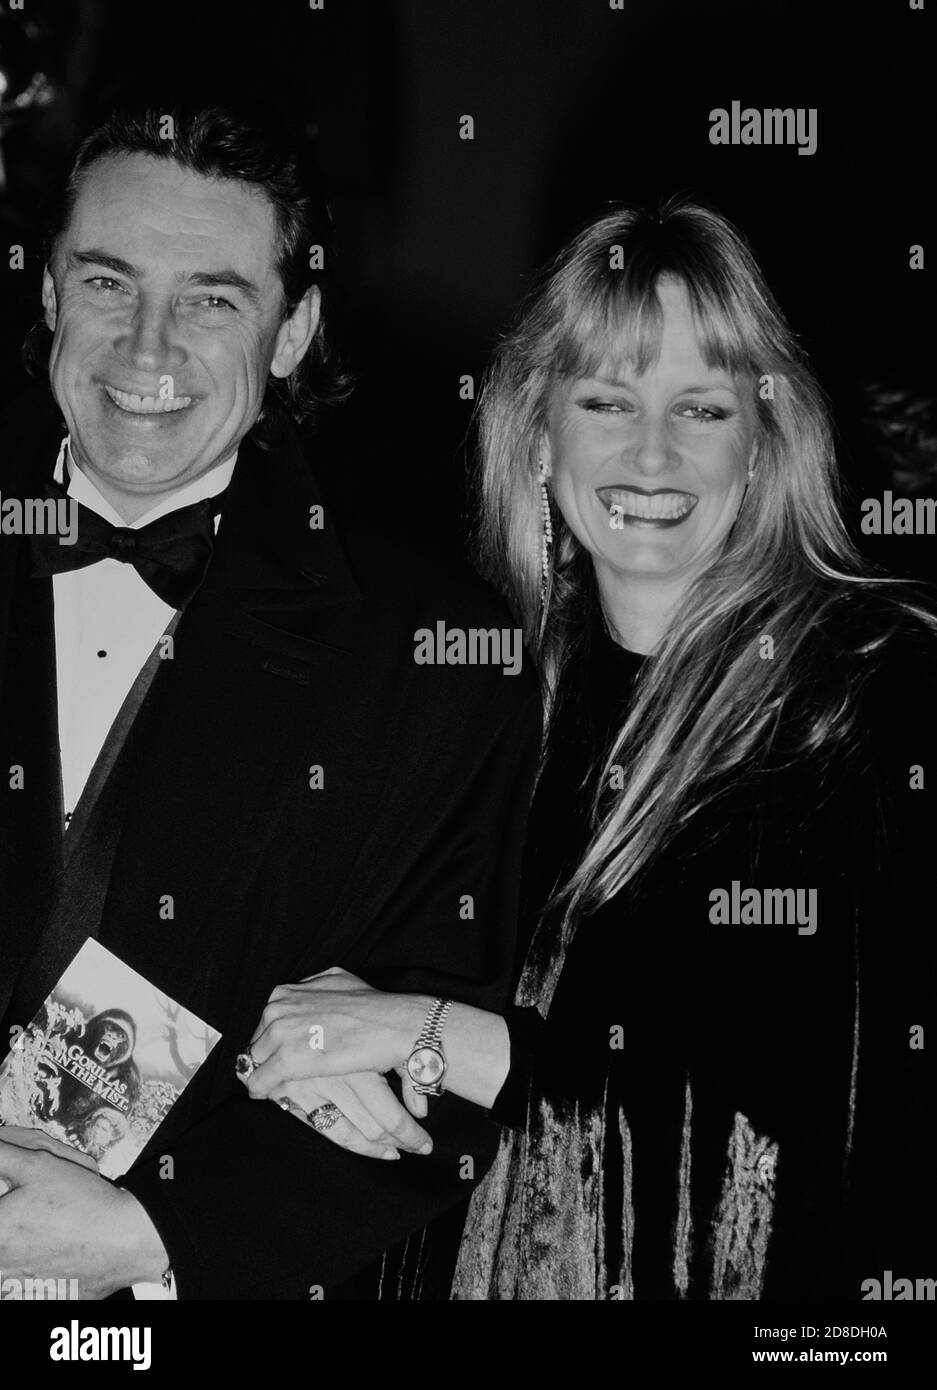 Twiggy and her husband Leigh Lawson attend the 'Gorillas in the Mist' premiere on January 24, 1989 in London, England. Stock Photo